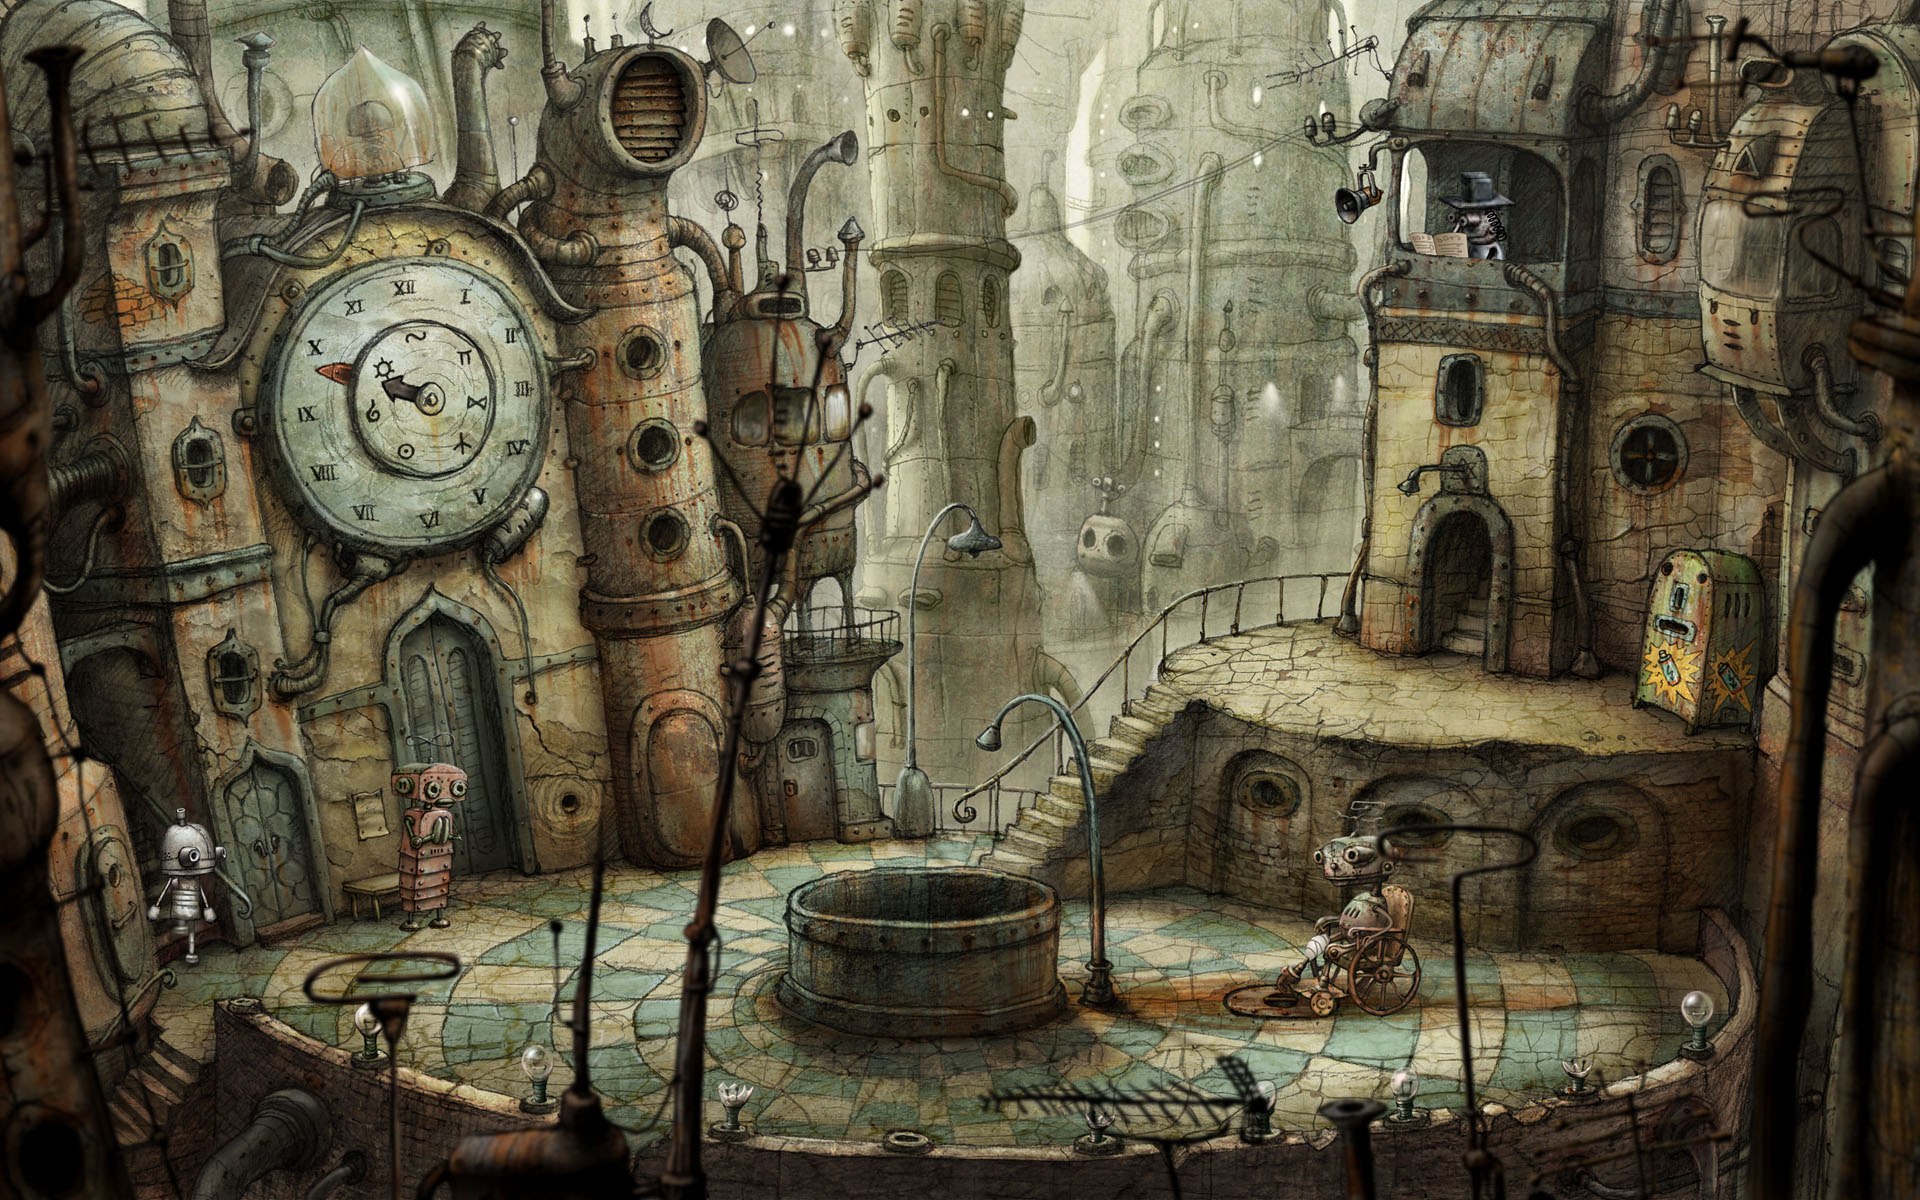 A town plaza in Machinarium, with several rusty robot characters, a church, water fountain and other buildings, all very detailed, with a muted palette.